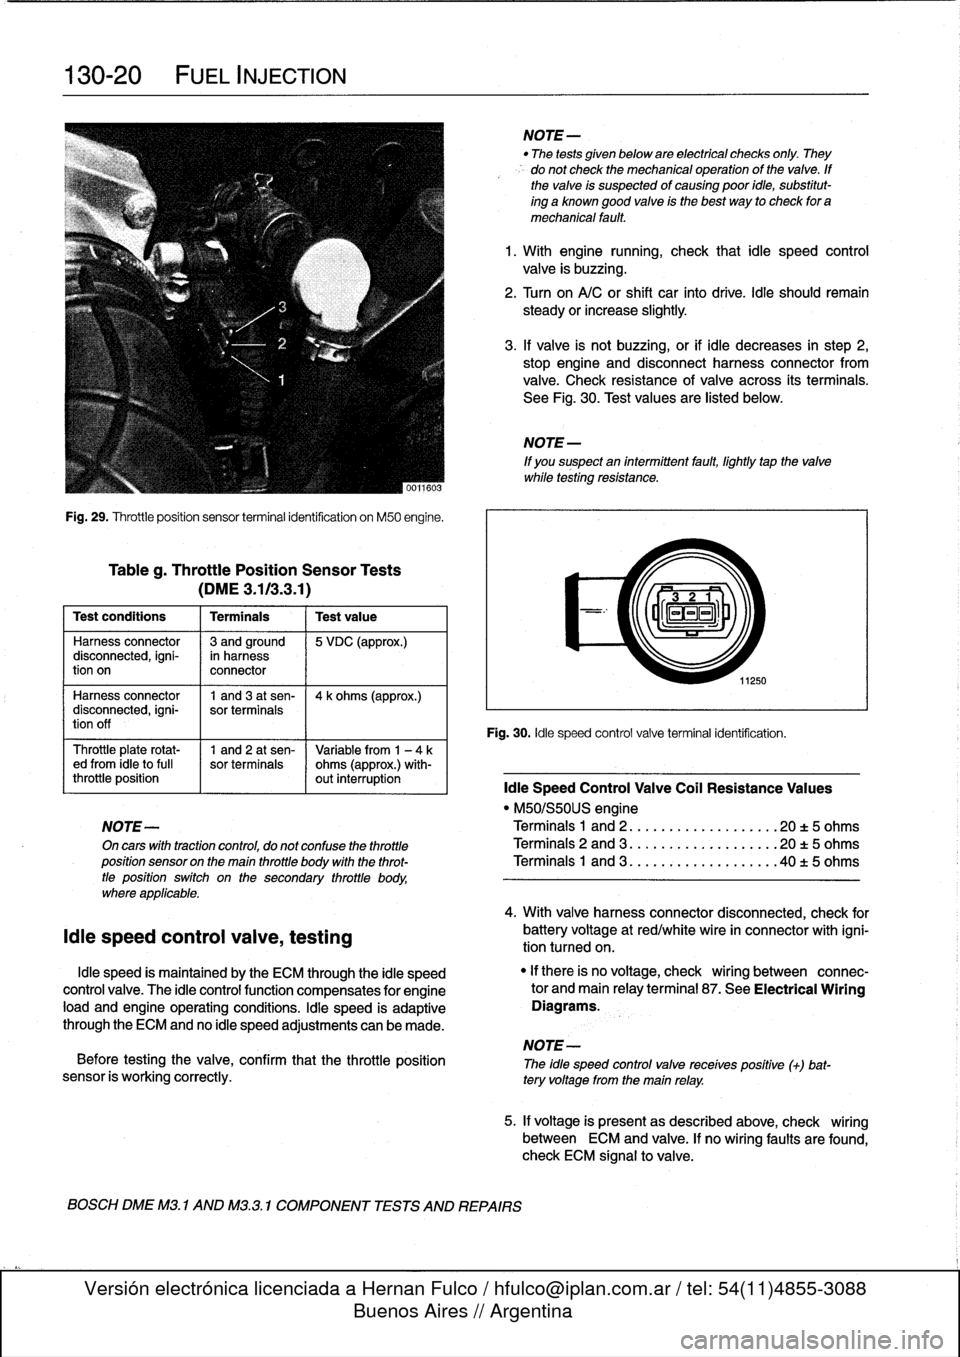 BMW 323i 1998 E36 Workshop Manual 
130-20

	

FUEL
INJECTION

Fig
.
29
.
Throttleposition
sensor
terminal
identification
on
M50
engine
.

Tableg
.
Throttle
Position
Sensor
Tests

(DME3
.113
.3
.1)

Test
conditions

	

I
Terminals

	

